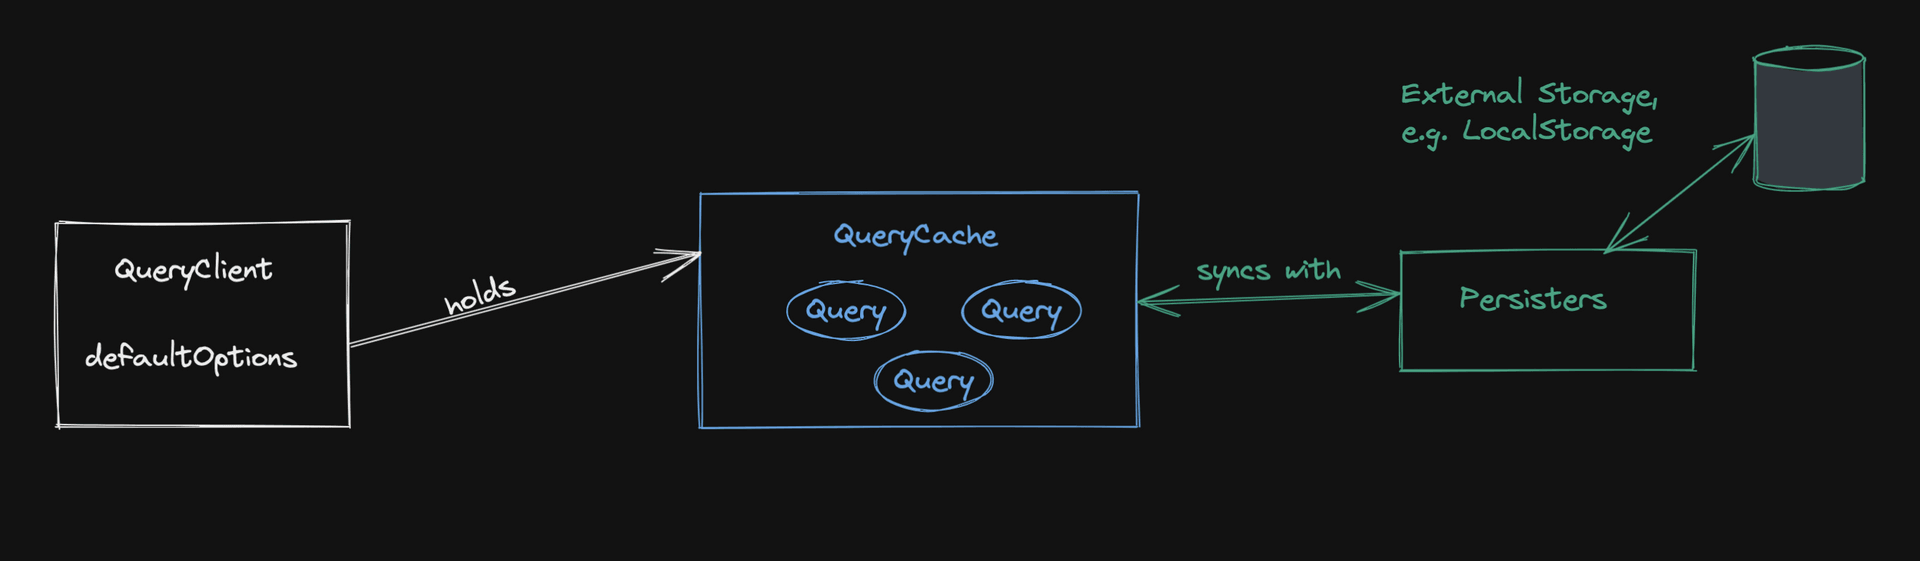 QueryCache consists of Queries and syncs with Persisters